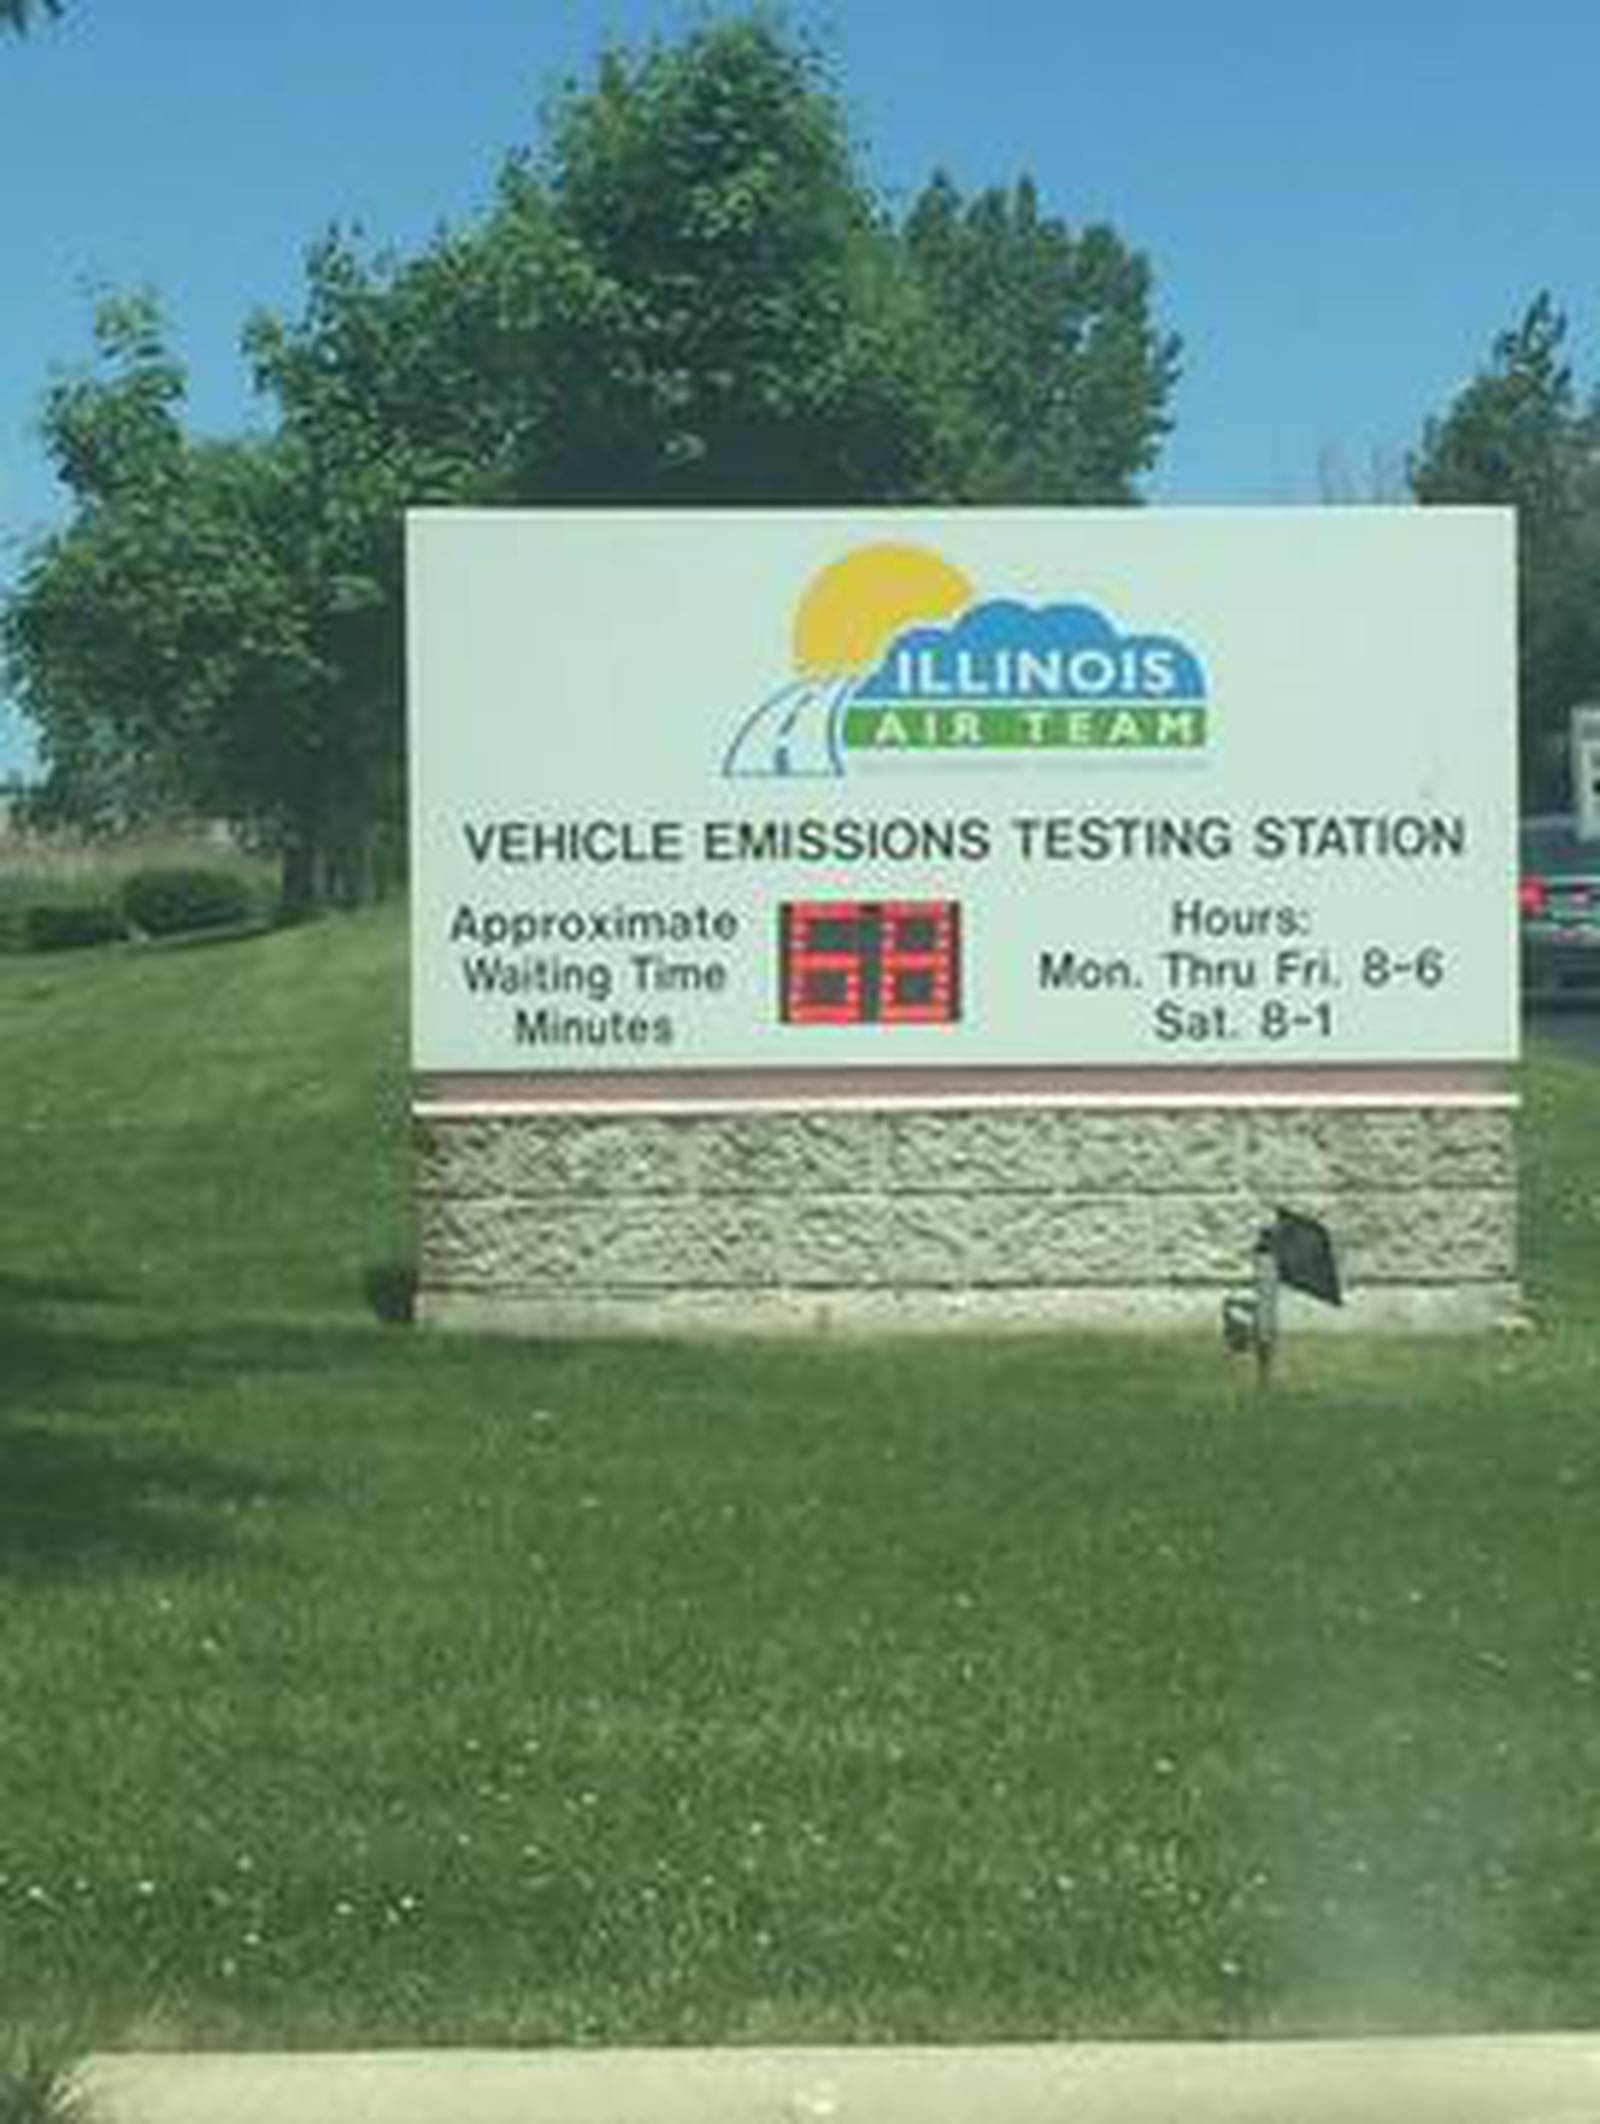 Emissions test backlog causes wait time spike at Joliet facility